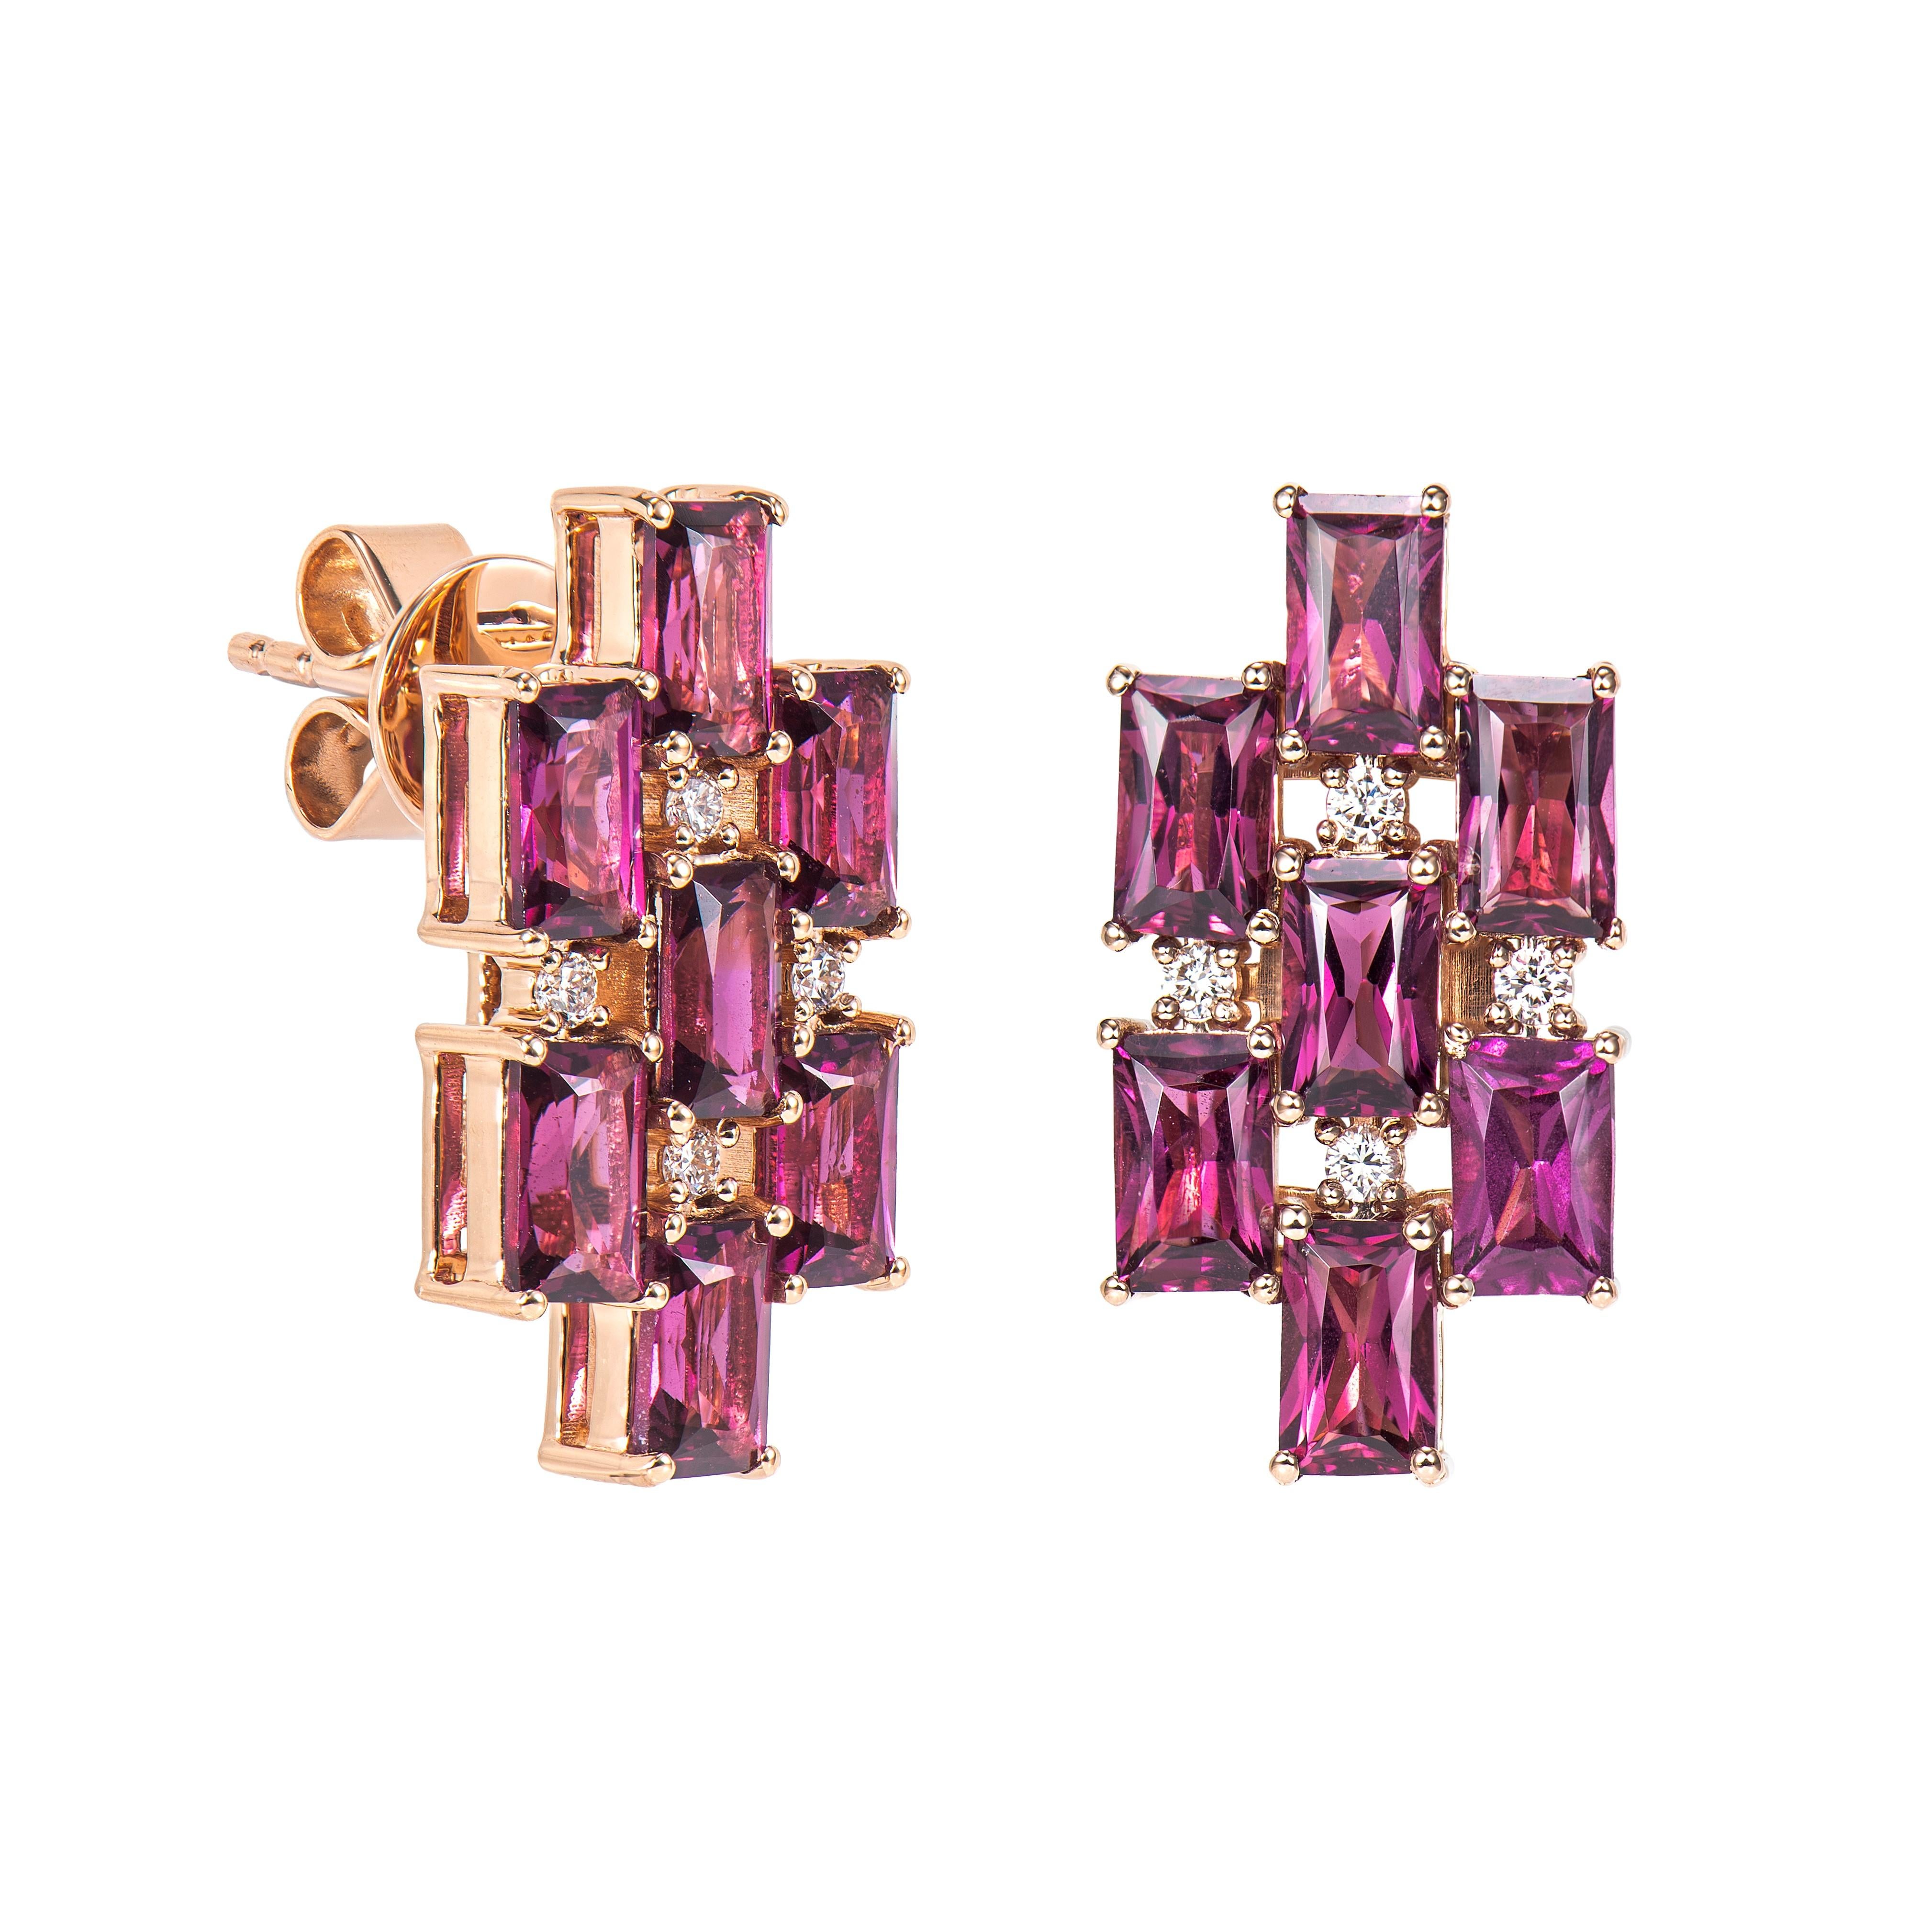 It is a fancy rhodolite earring in an octagon shape. This earring made of precious stone has a timeless, exquisite appeal that can be worn on a variety of occasions. Materials such as amethyst, citrine, and rhodolite are suitable. One of these is a